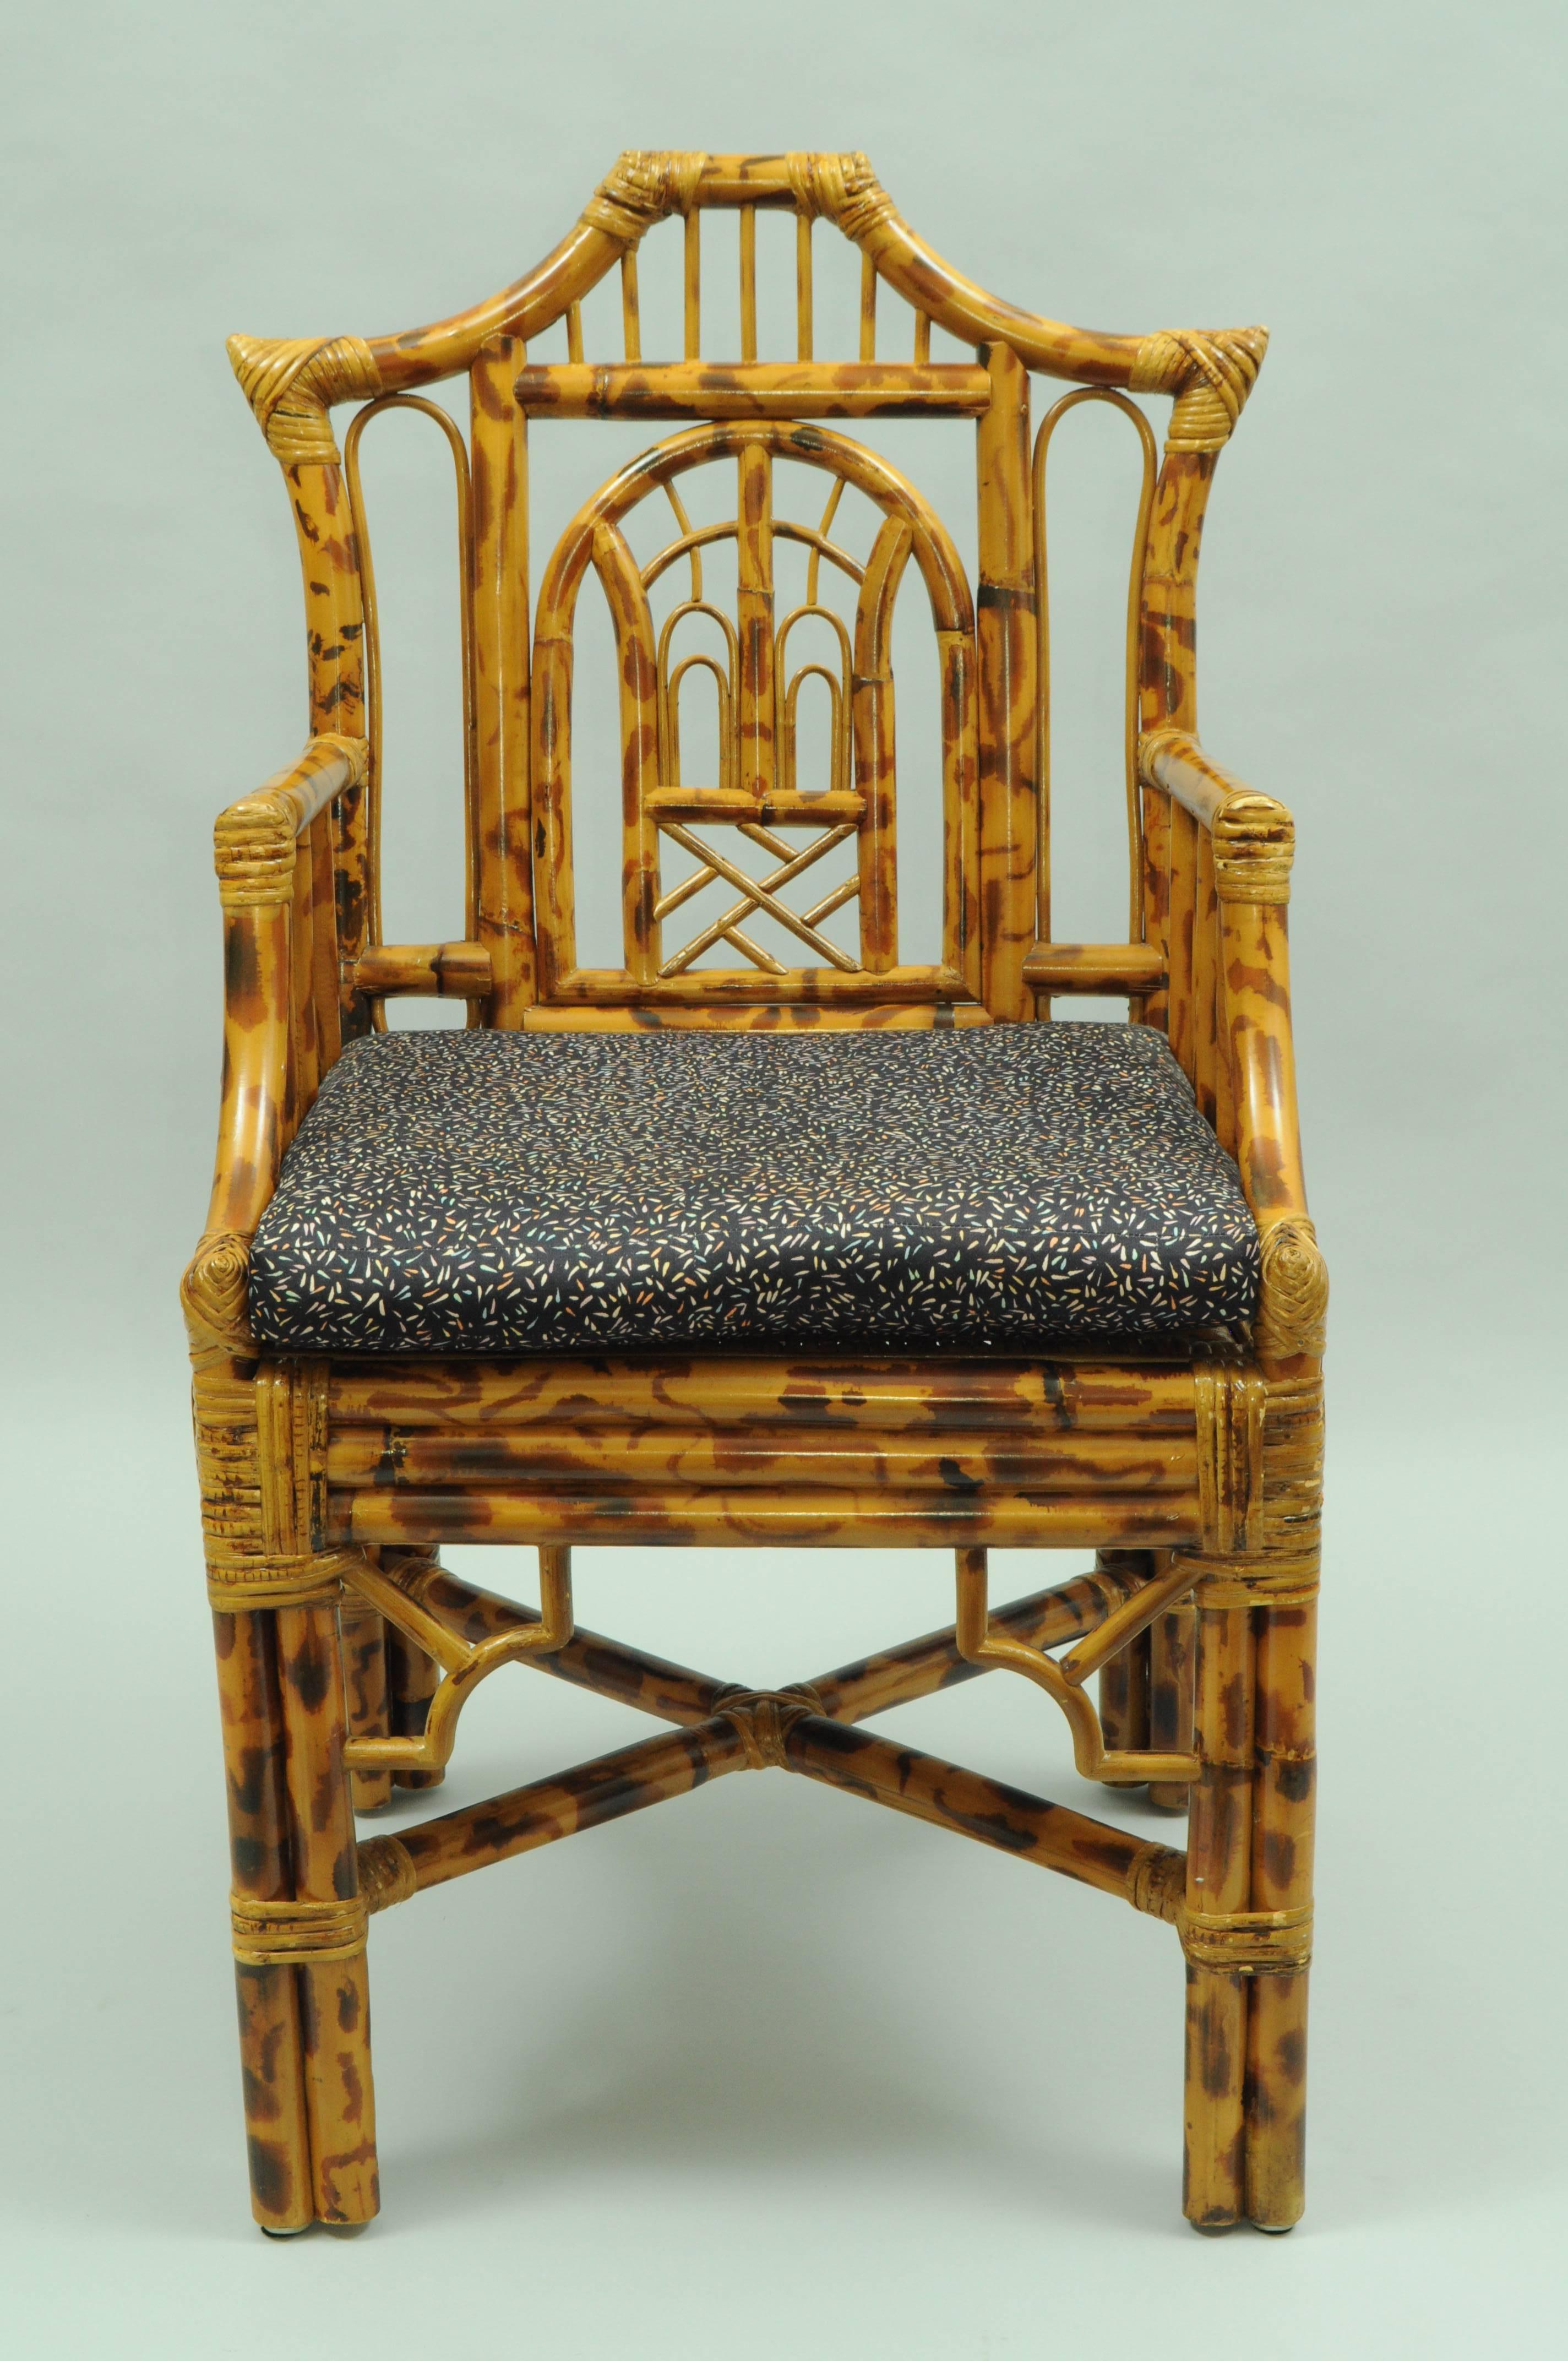 Vintage bamboo armchair in the Chinese Chippendale style. Item features a bamboo reed frame, ornate pierced design, woven seat, loose cushion, pagoda form back, stretcher base, and great chinoiserie corner accents. Possibly by Maitland Smith. Marked